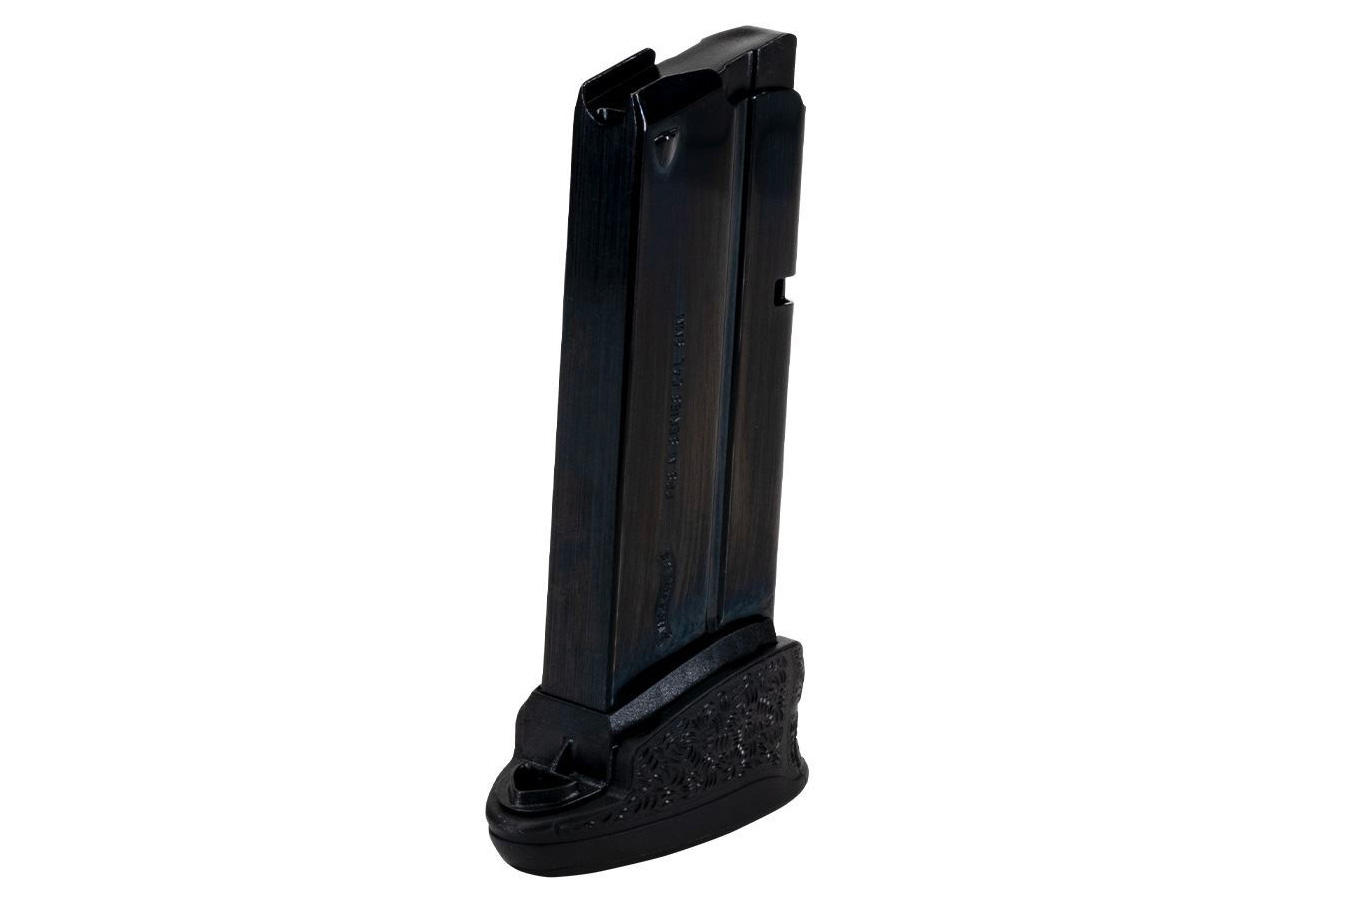 WALTHER PPS M2 9MM 7-ROUND FACTORY MAGAZINE (LAW ENFORCEMENT MODEL)